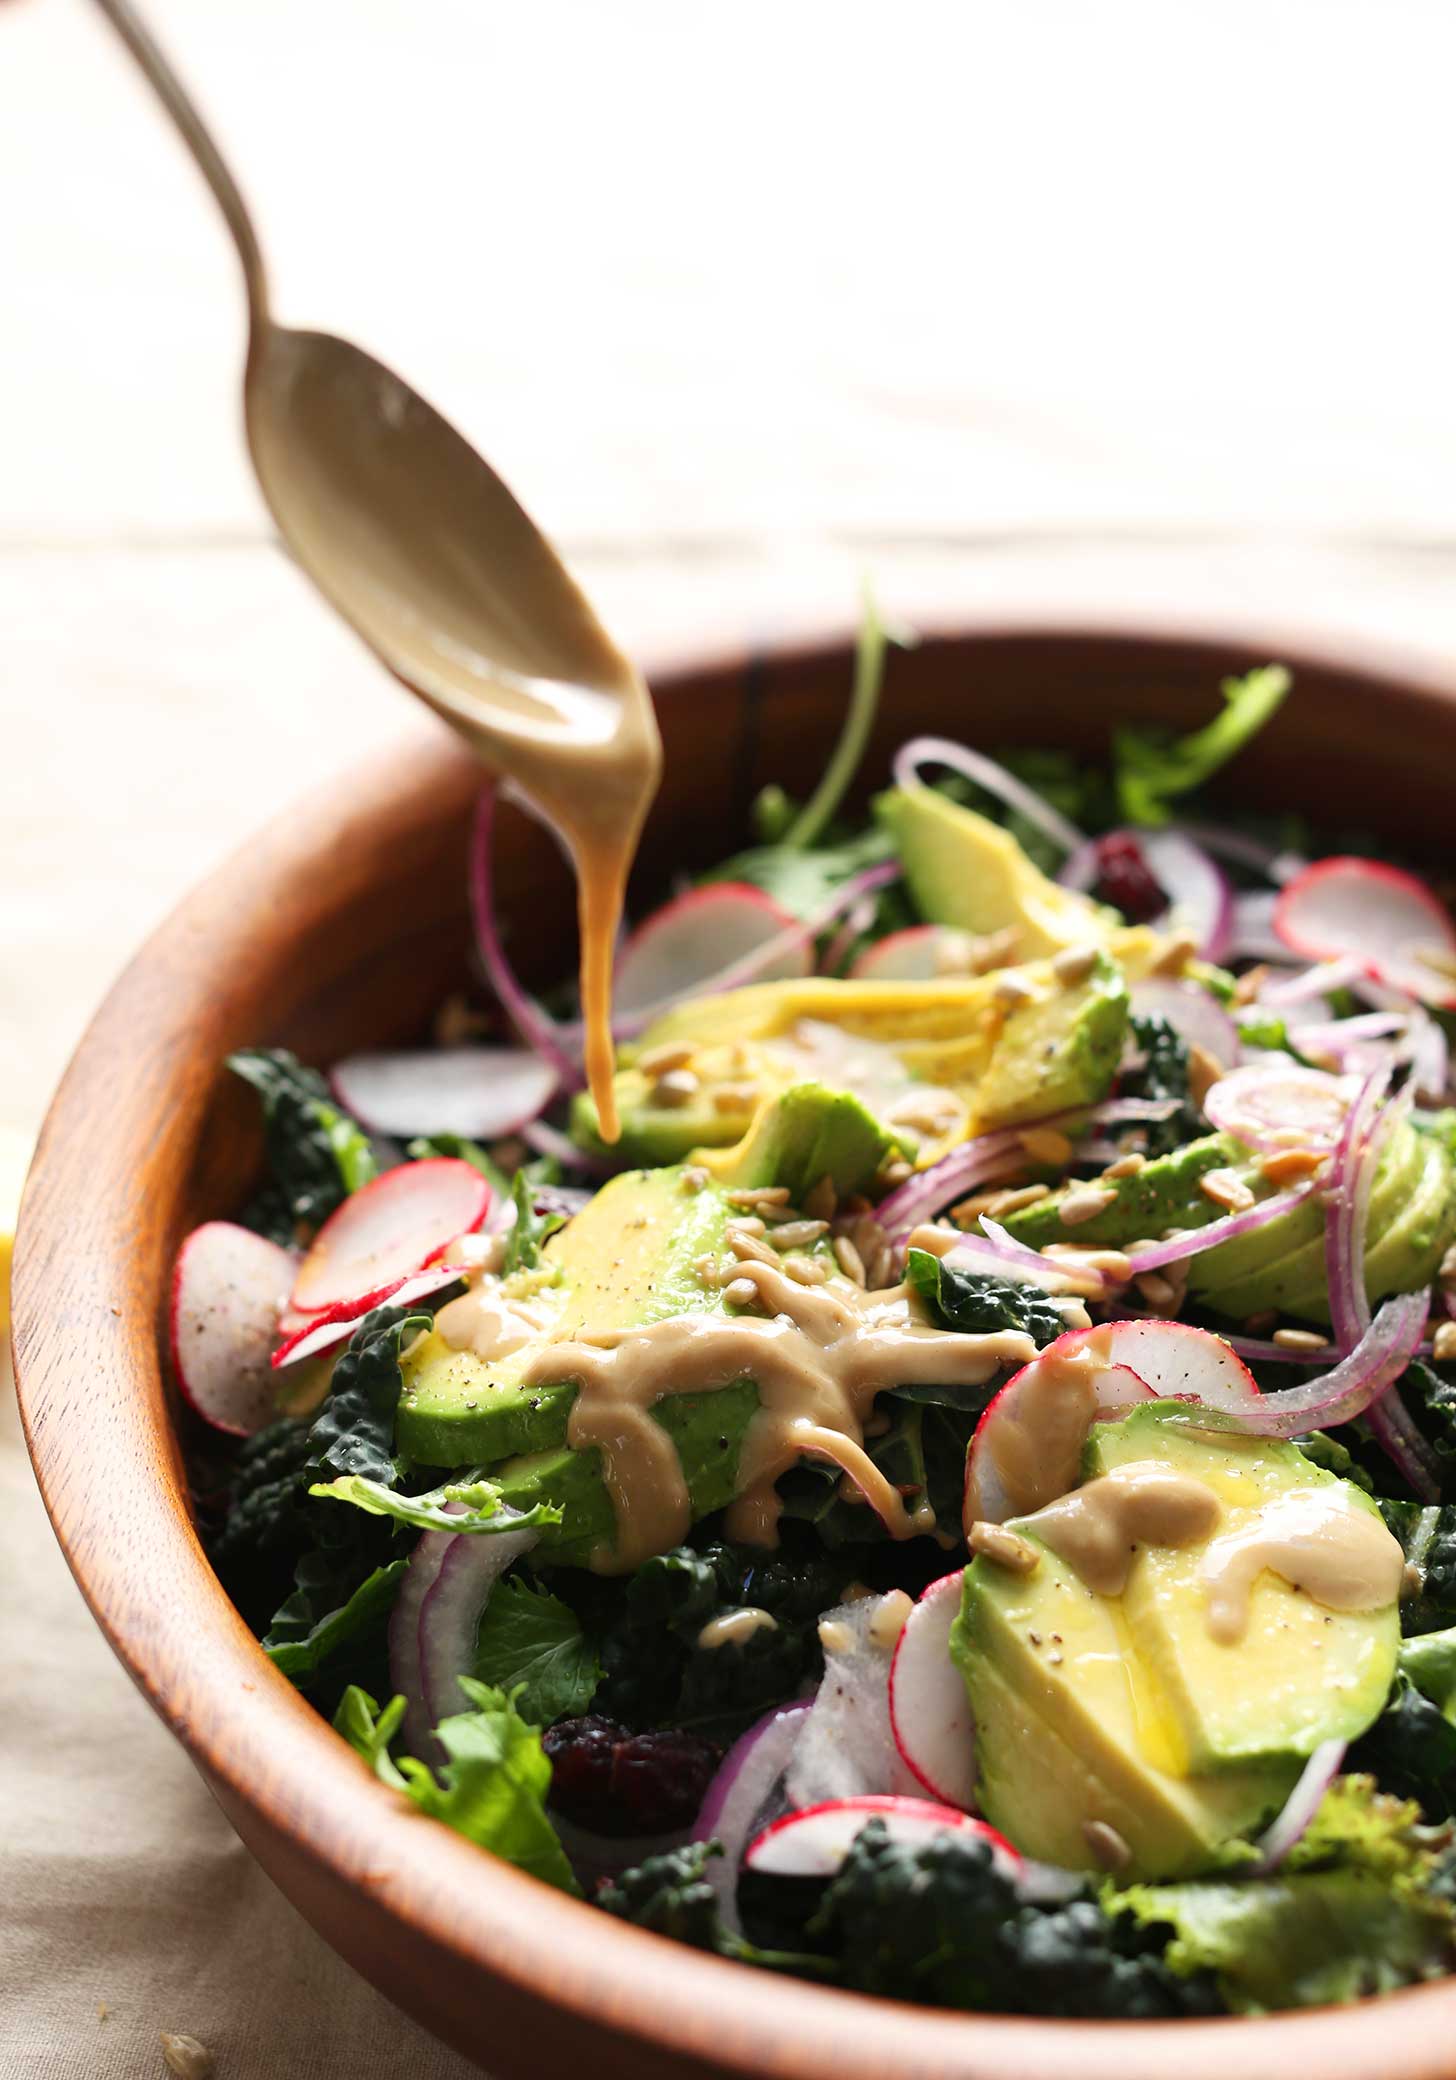 Pouring the easiest homemade no-mix dressing over our detox salad recipe